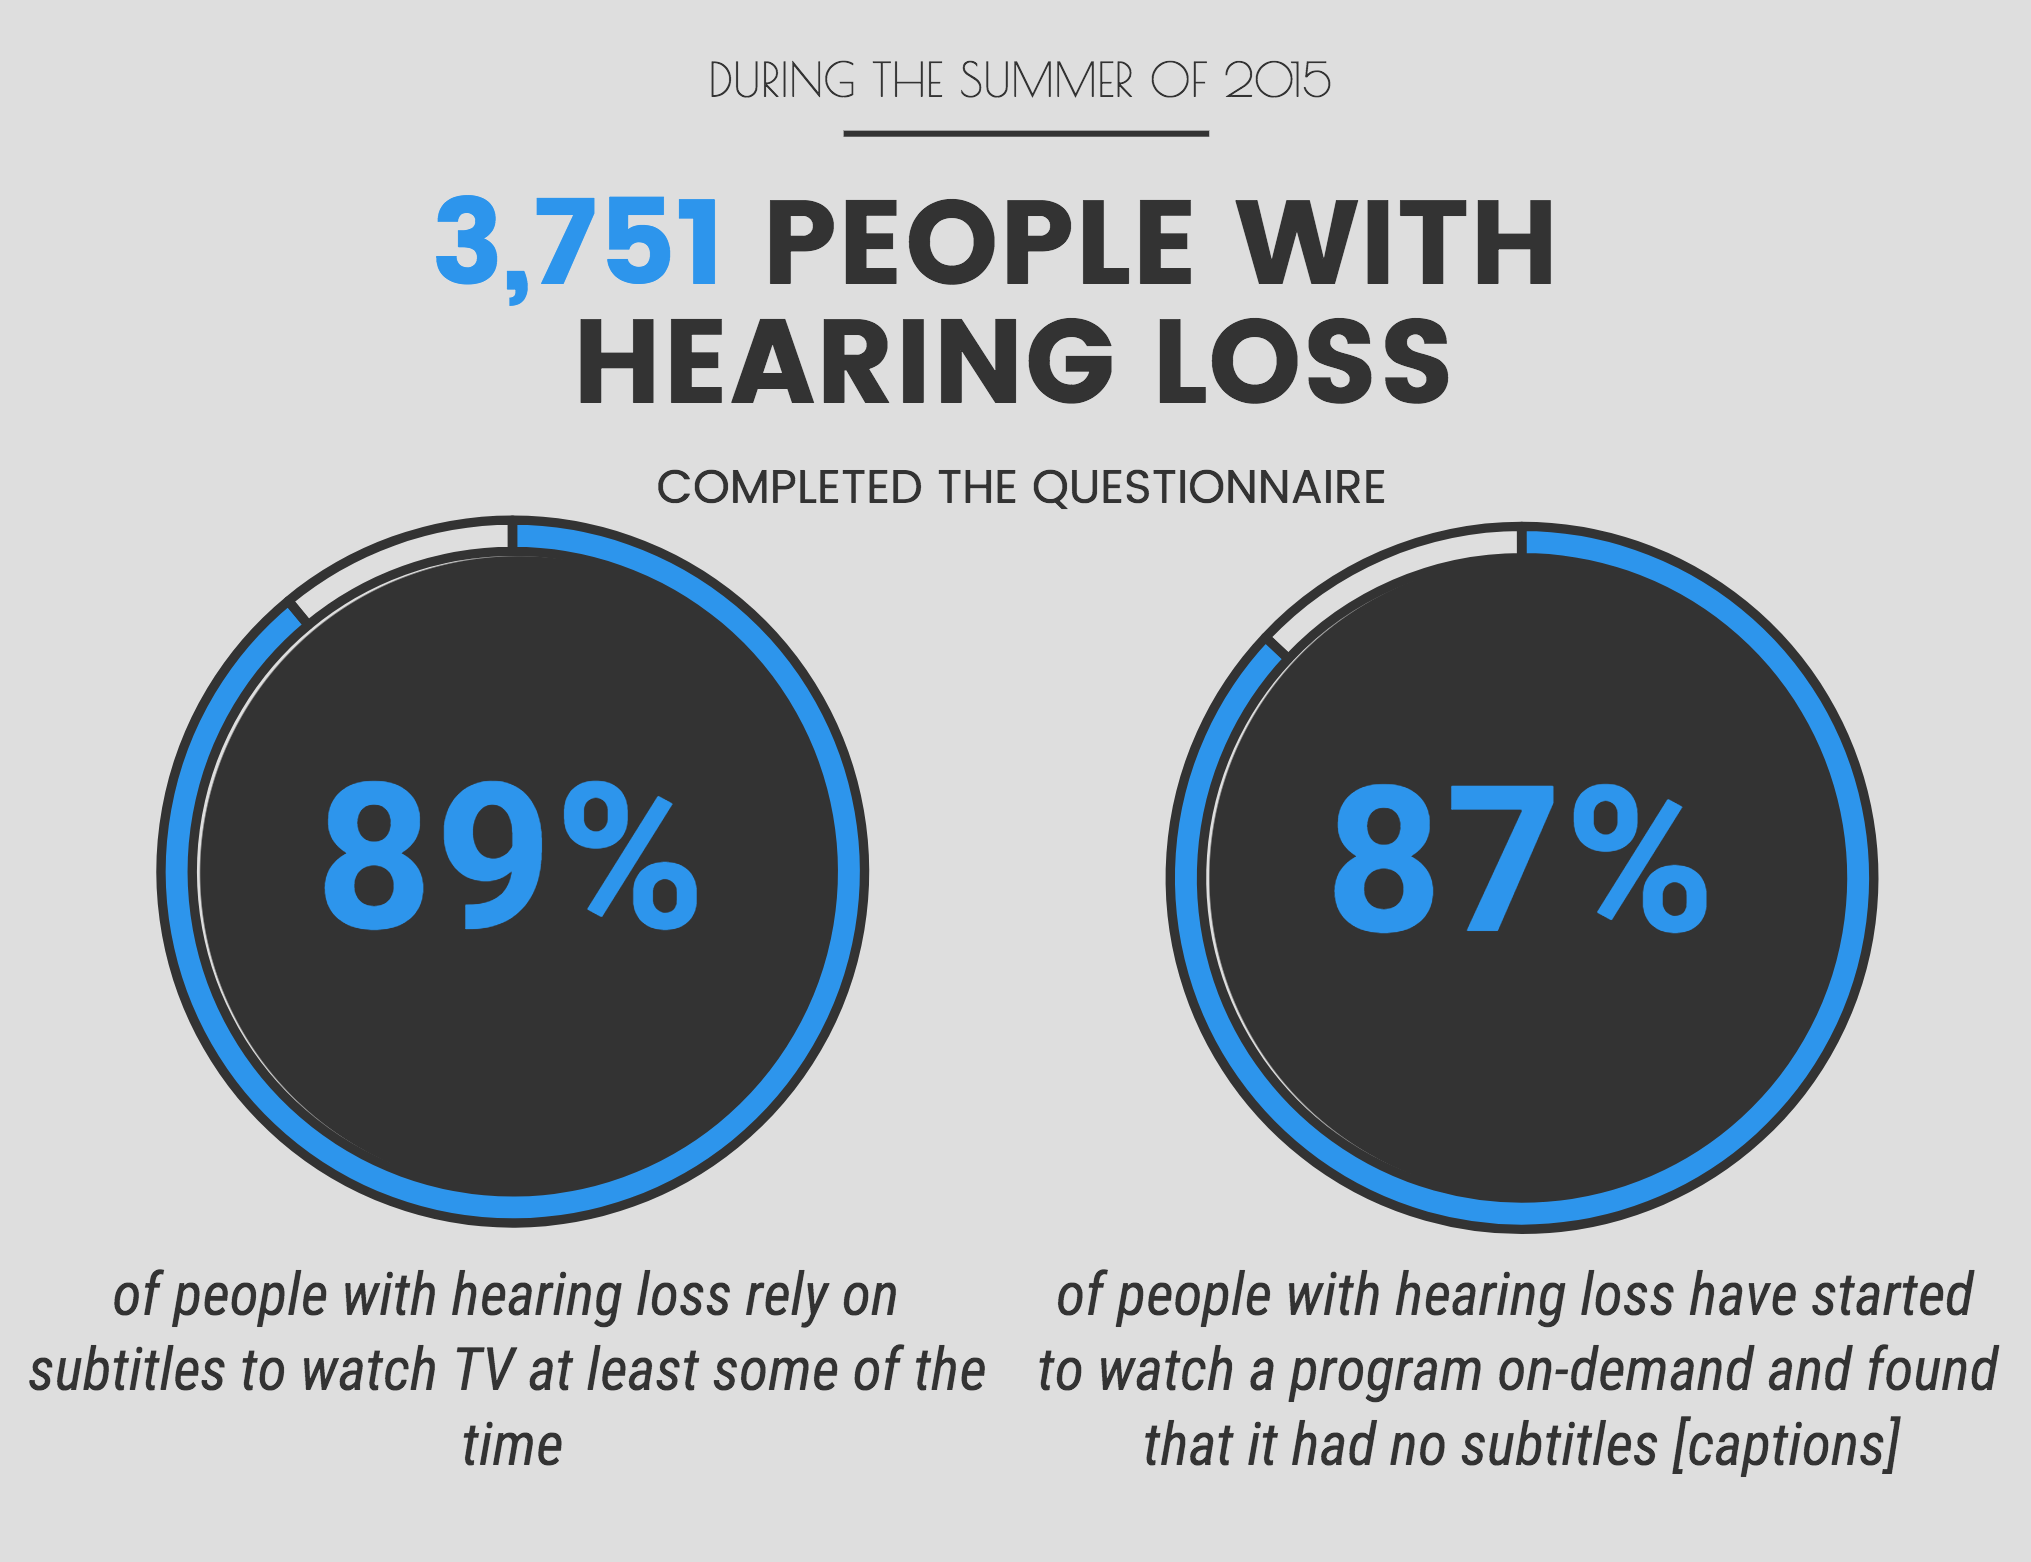 During the summer of 2015 3,751 people with hearing loss completed the questionnaire. 89% of people with hearing loss rely on subtitles to watch TV at least some of the time. 87% of people with hearing loss have started to watch a program on-demand and found that it had no subtitles